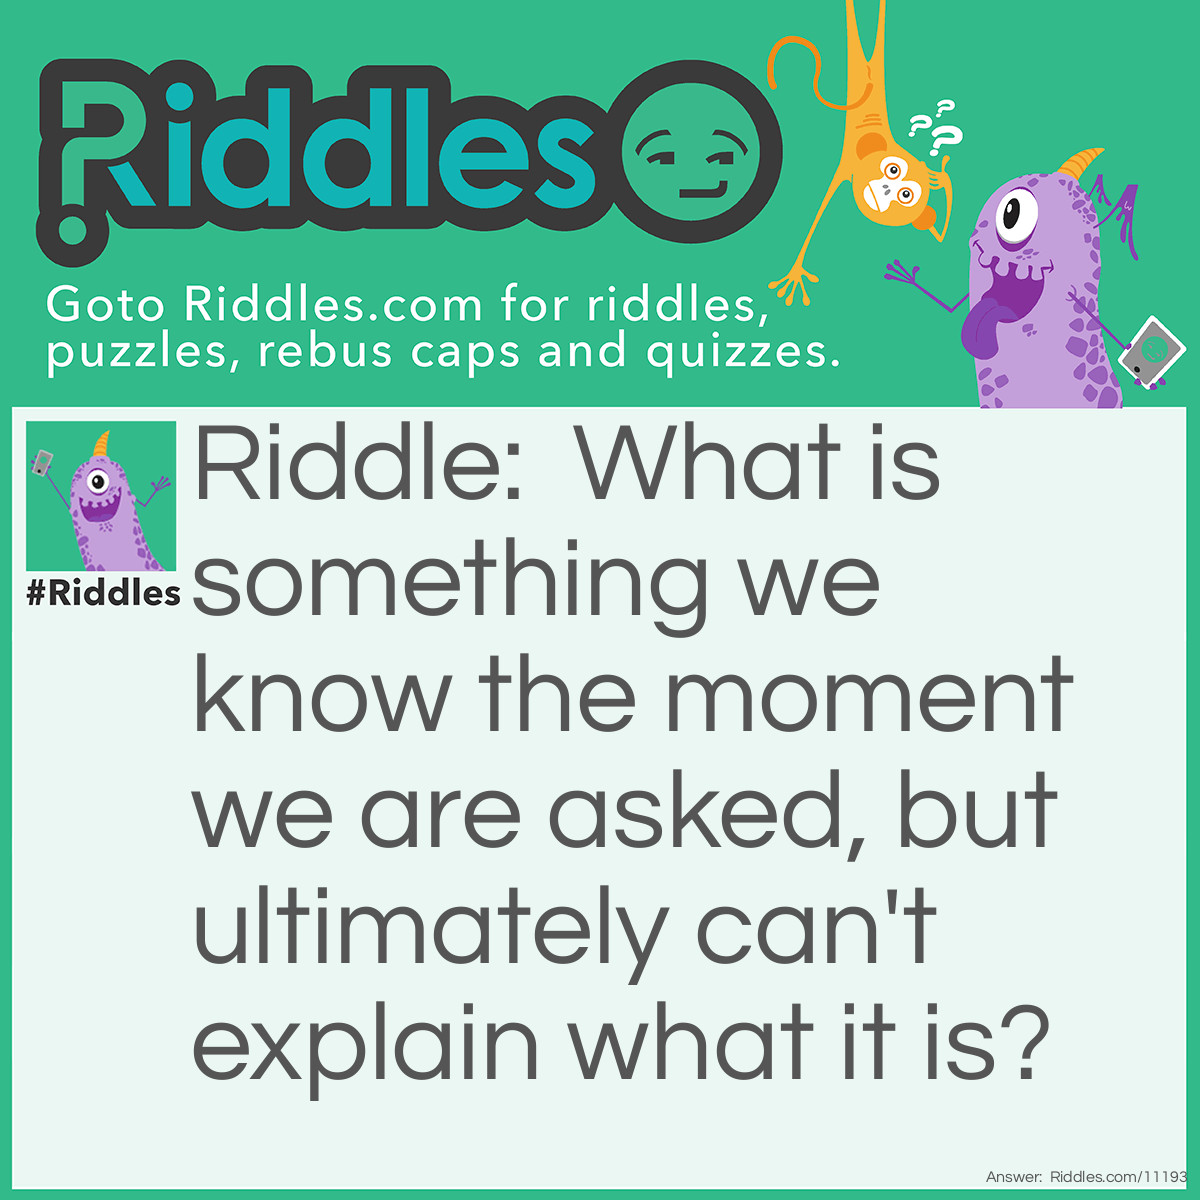 Riddle: What is something we know the moment we are asked, but ultimately can't explain what it is? Answer: Time.